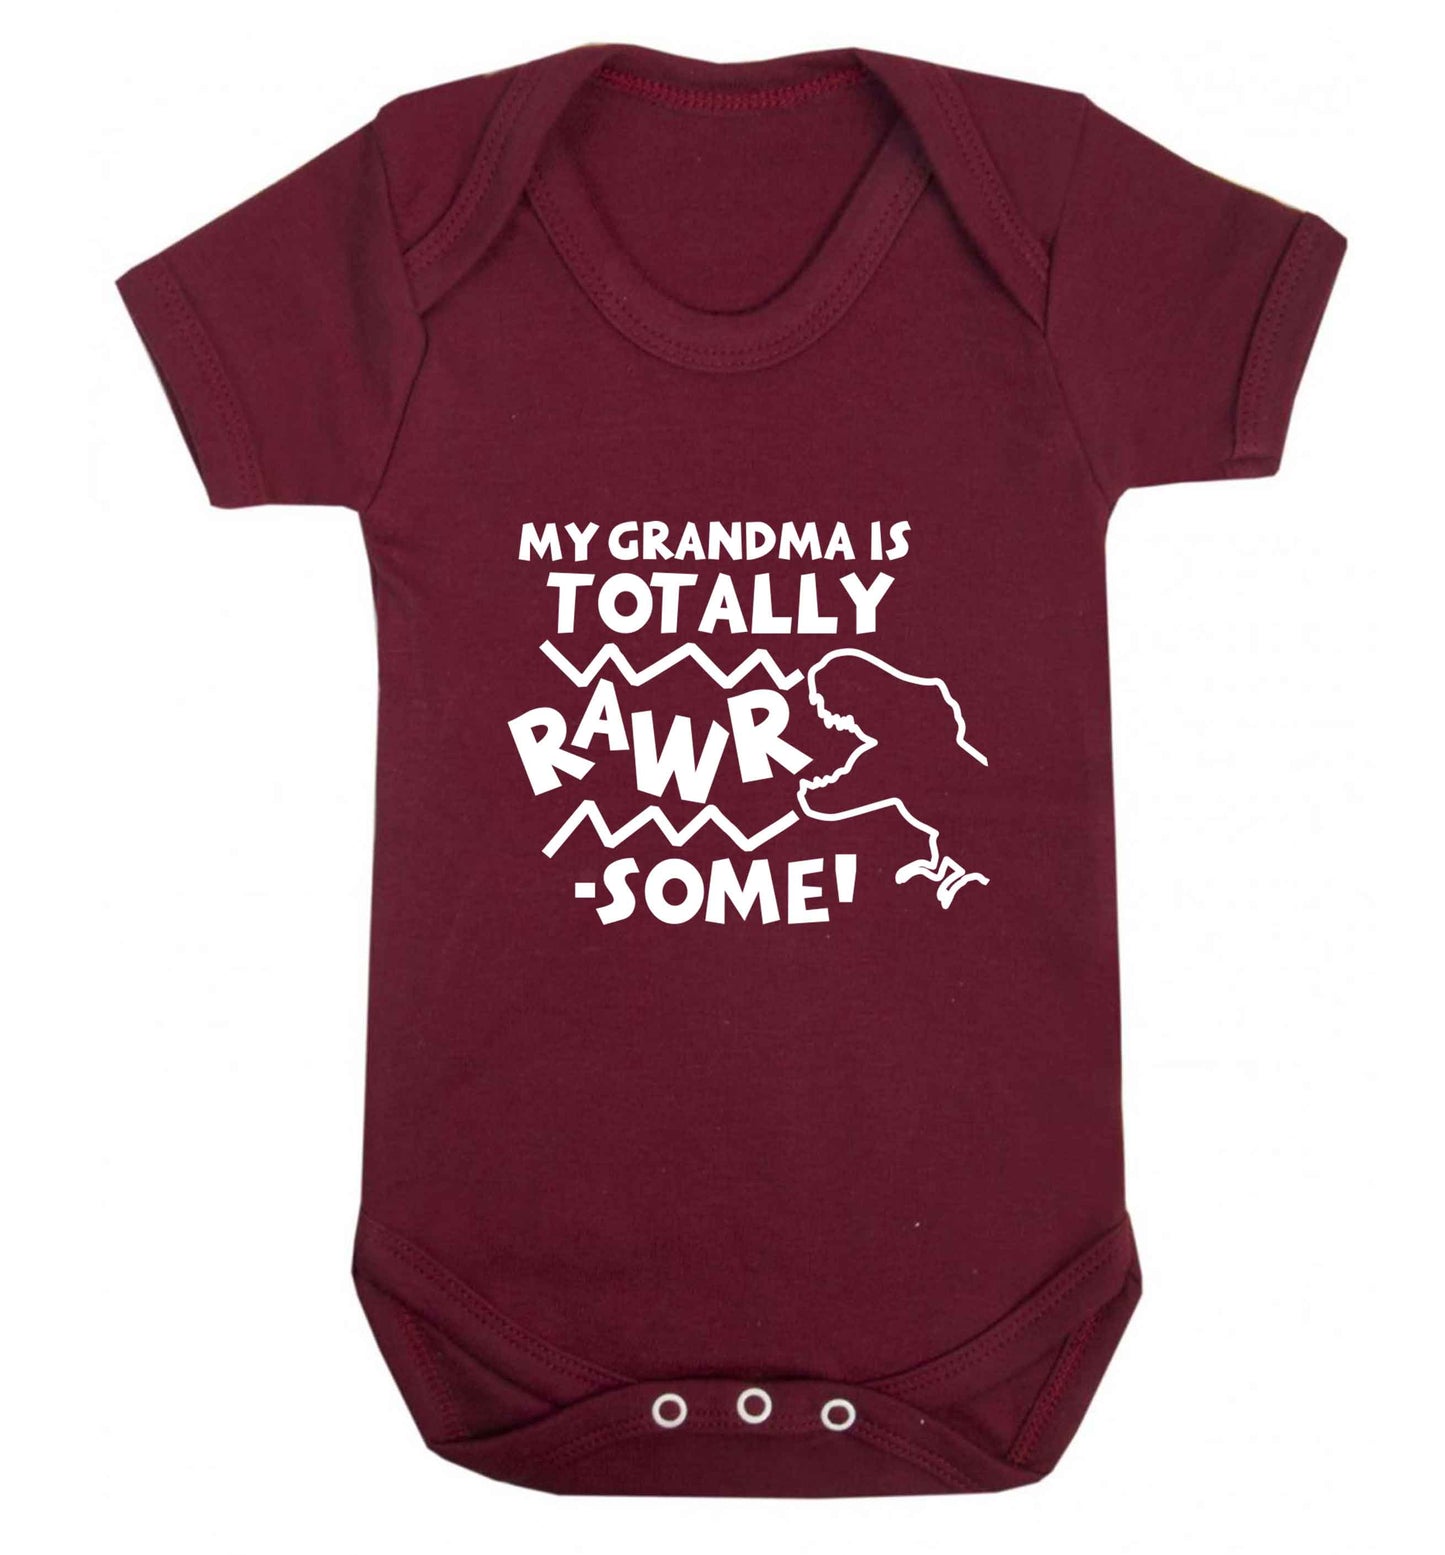 My grandma is totally rawrsome baby vest maroon 18-24 months